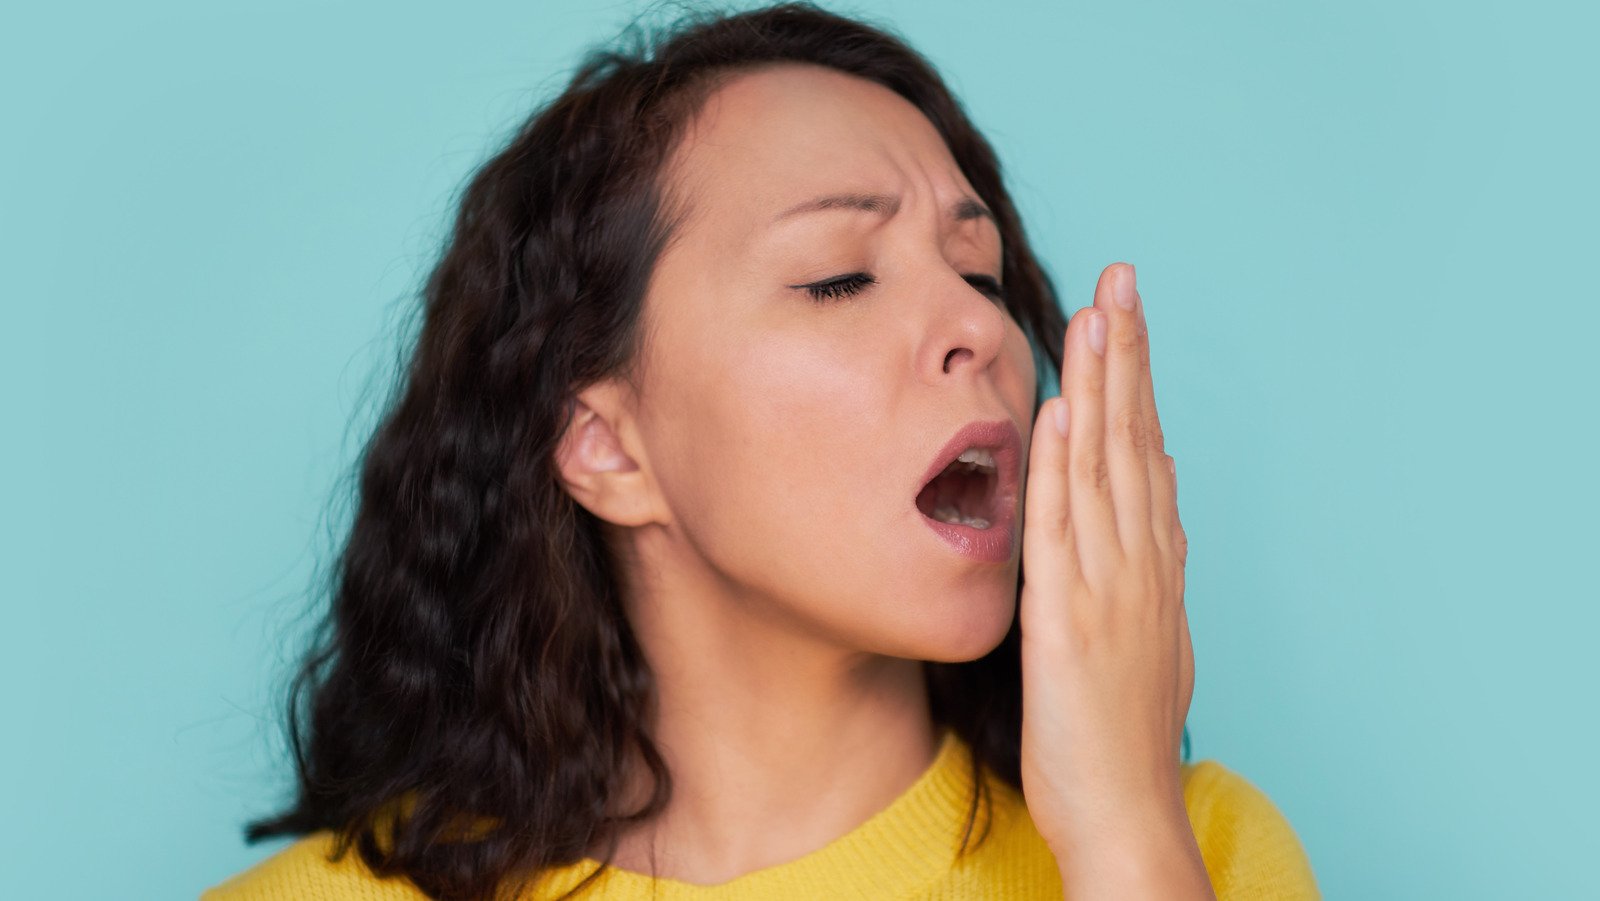 Your Bad Breath Can Reveal Surprising Things About Your Health